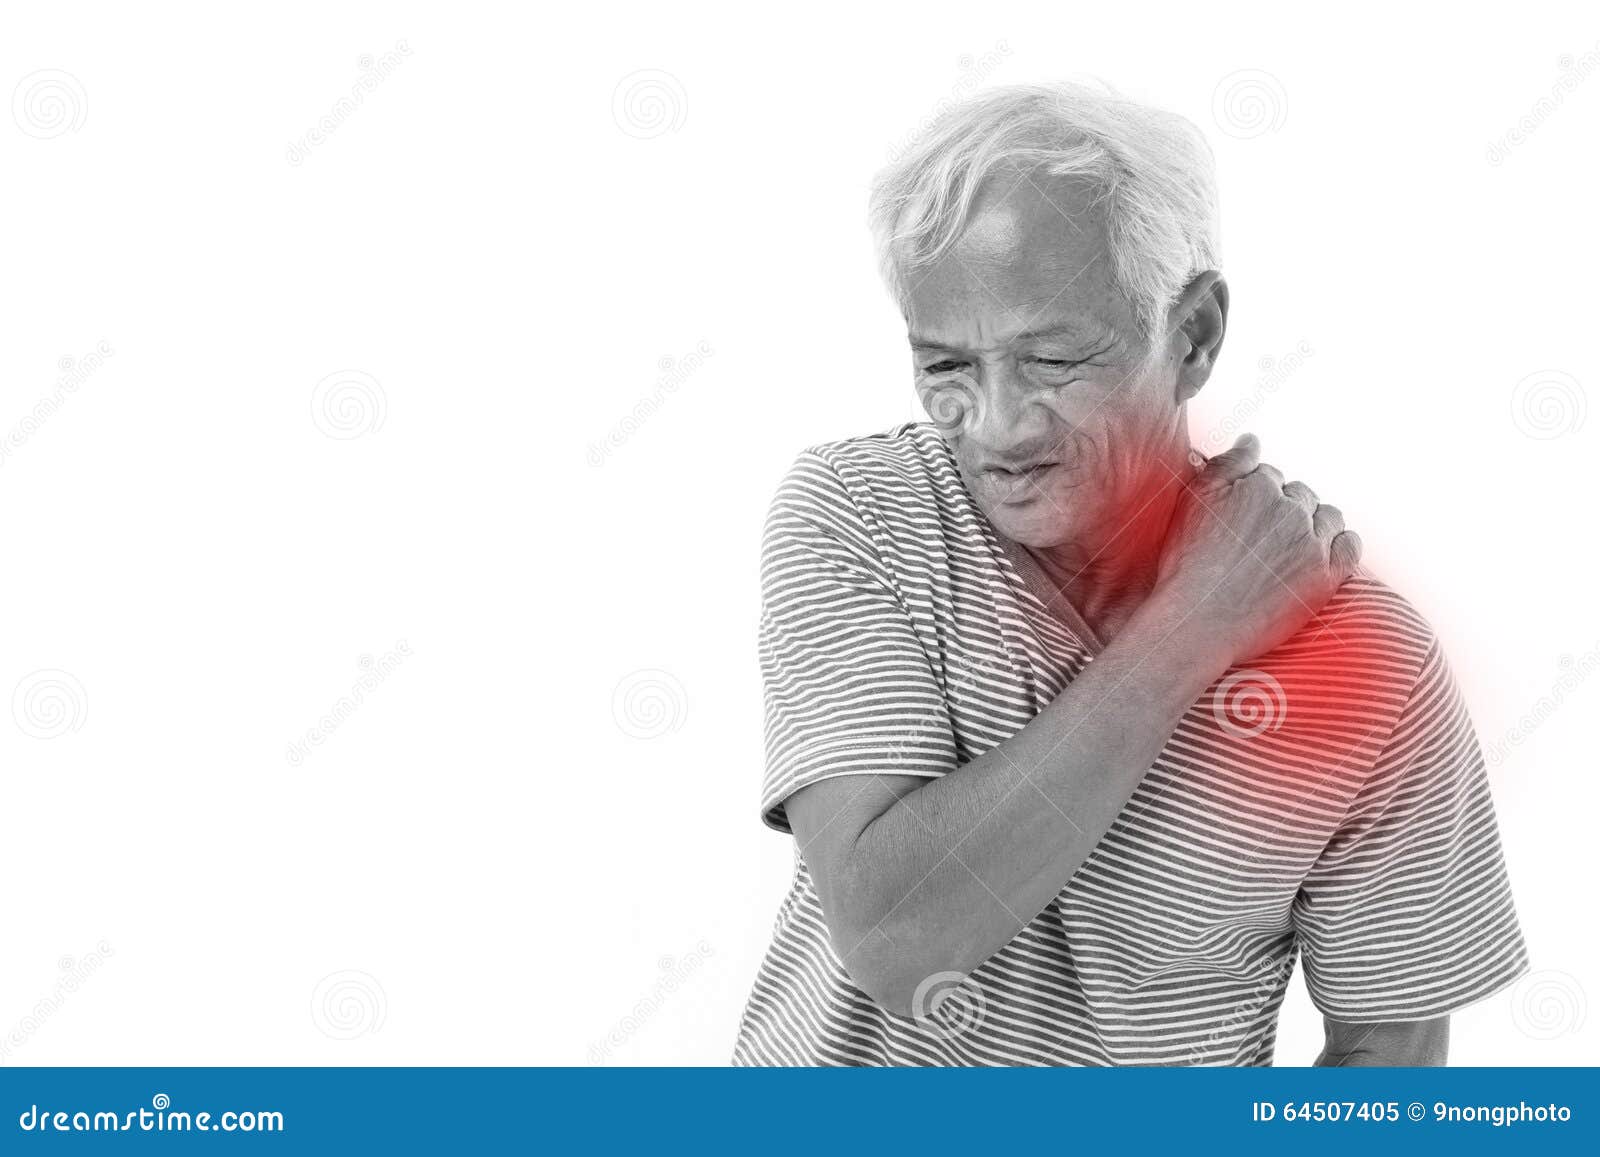 old man suffering from shoulder muscle inflammation or injury